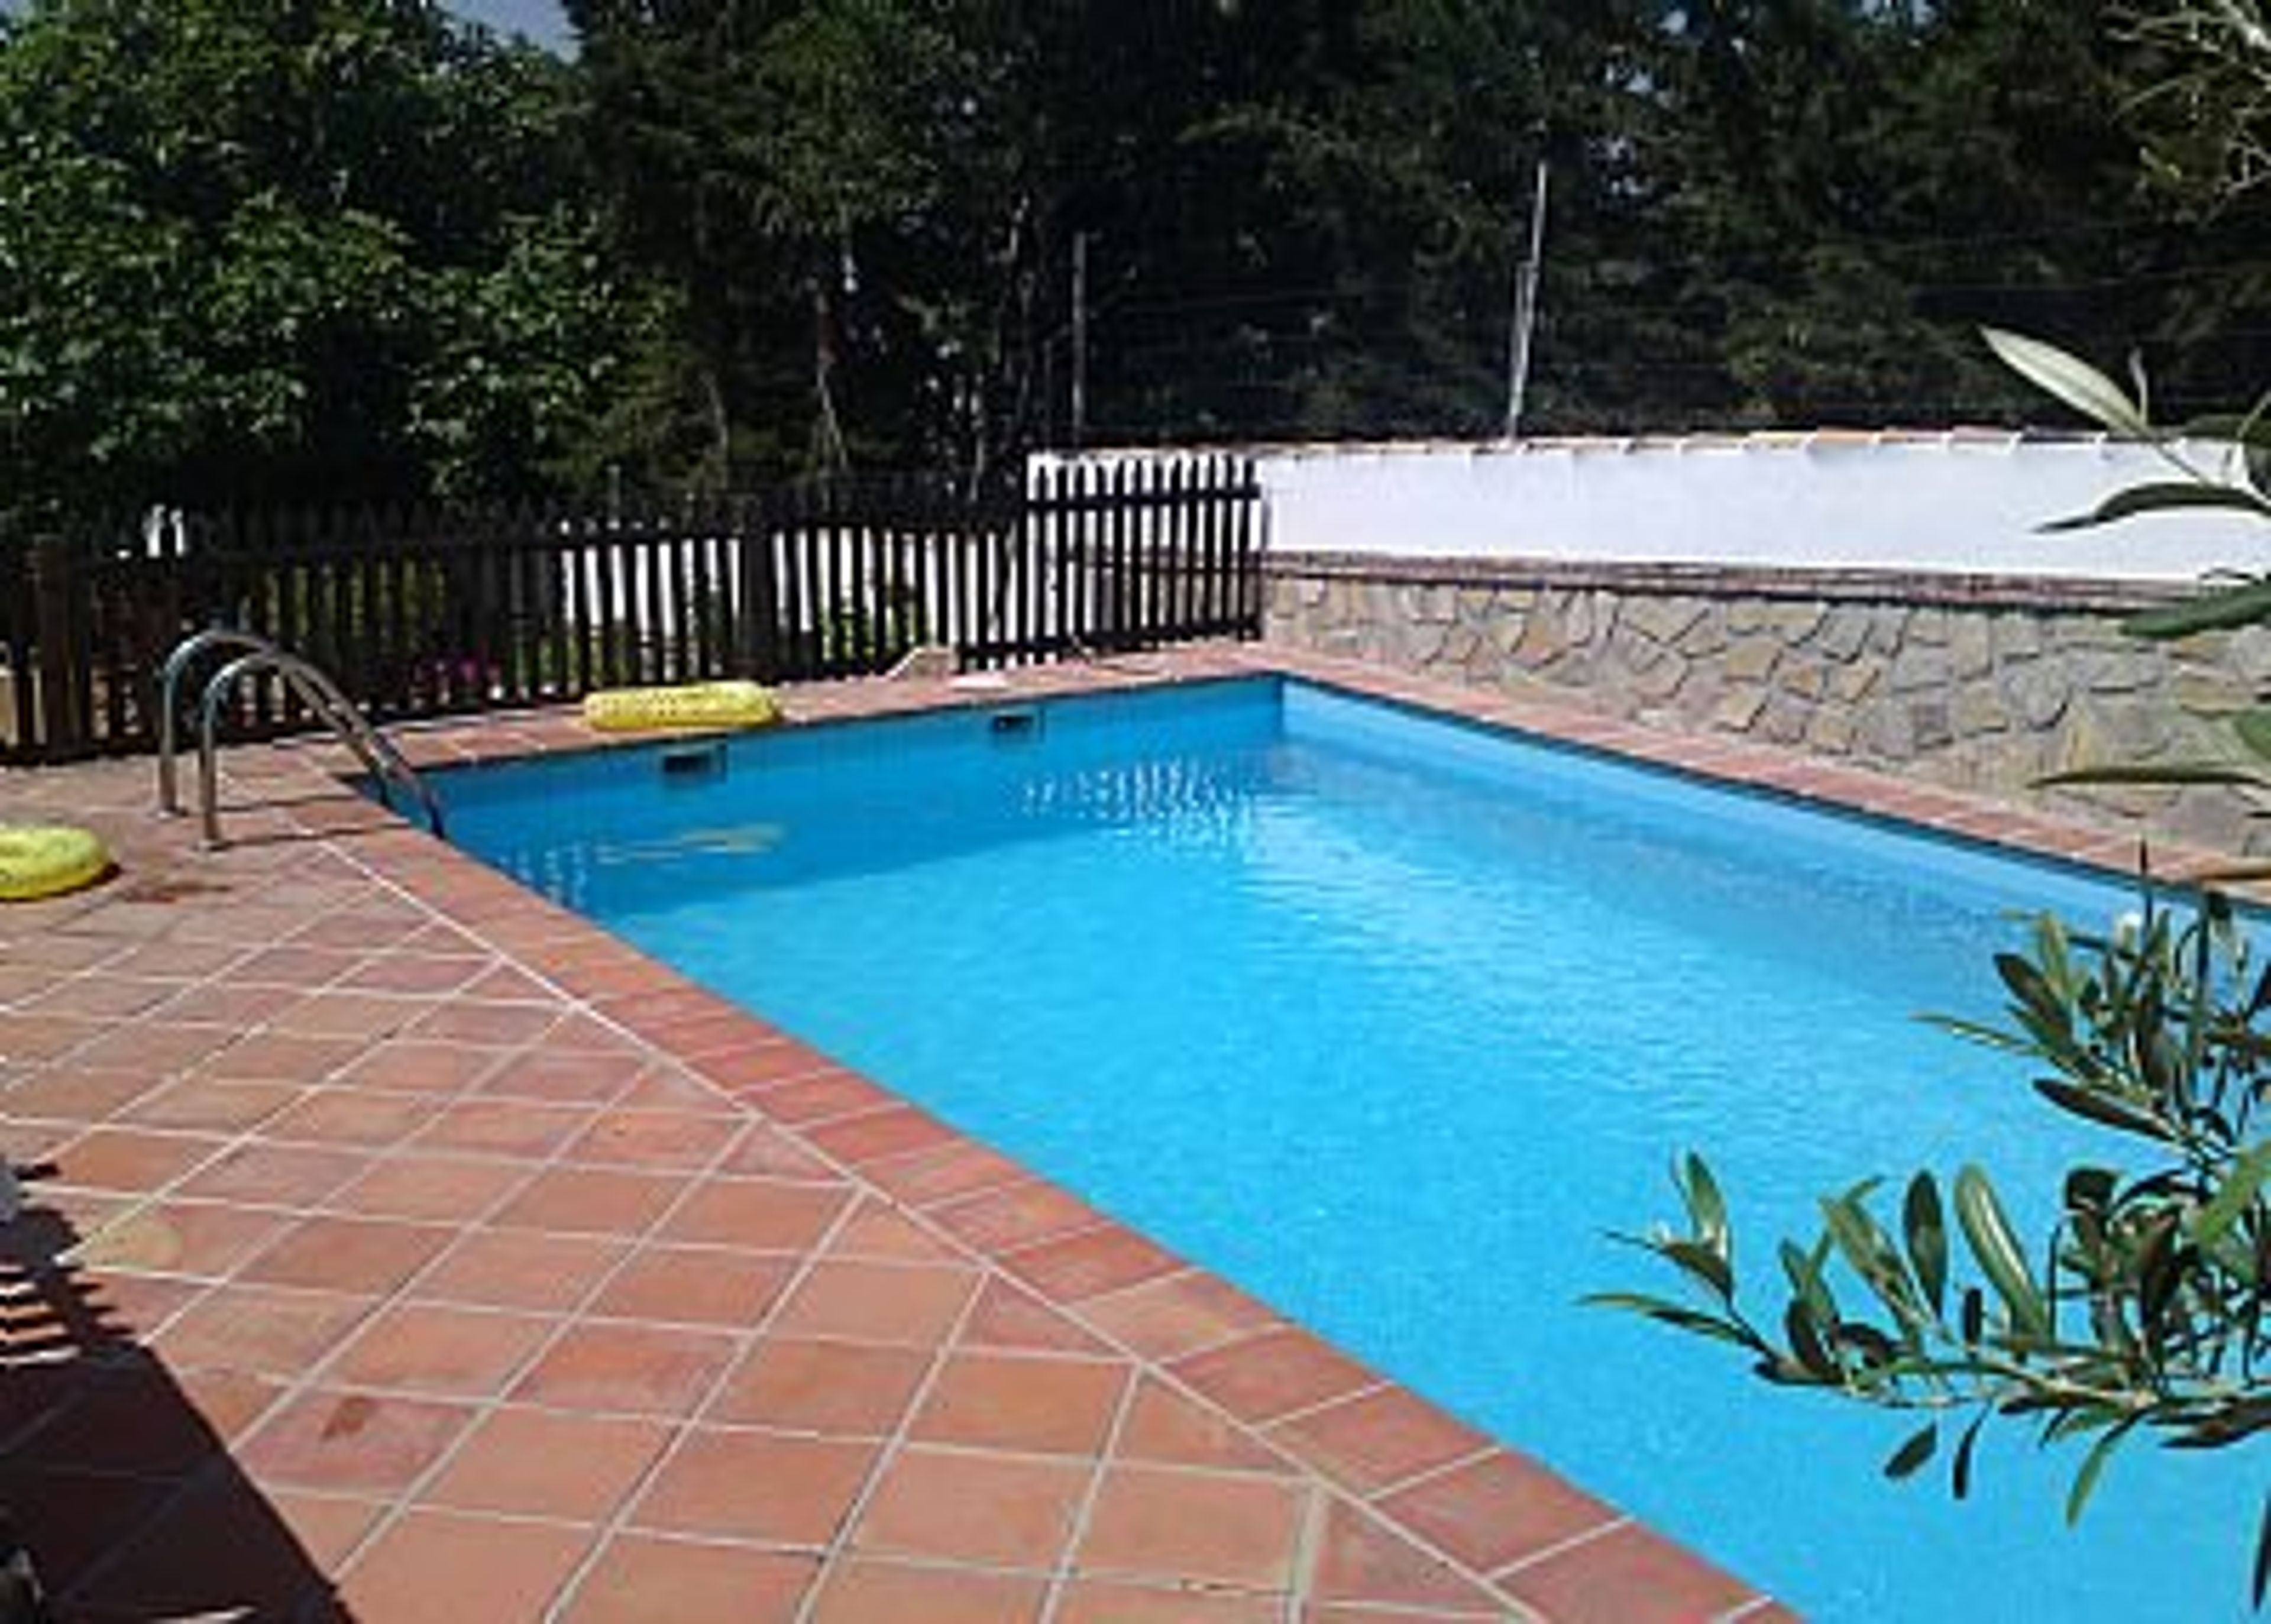 Electrically heated pool